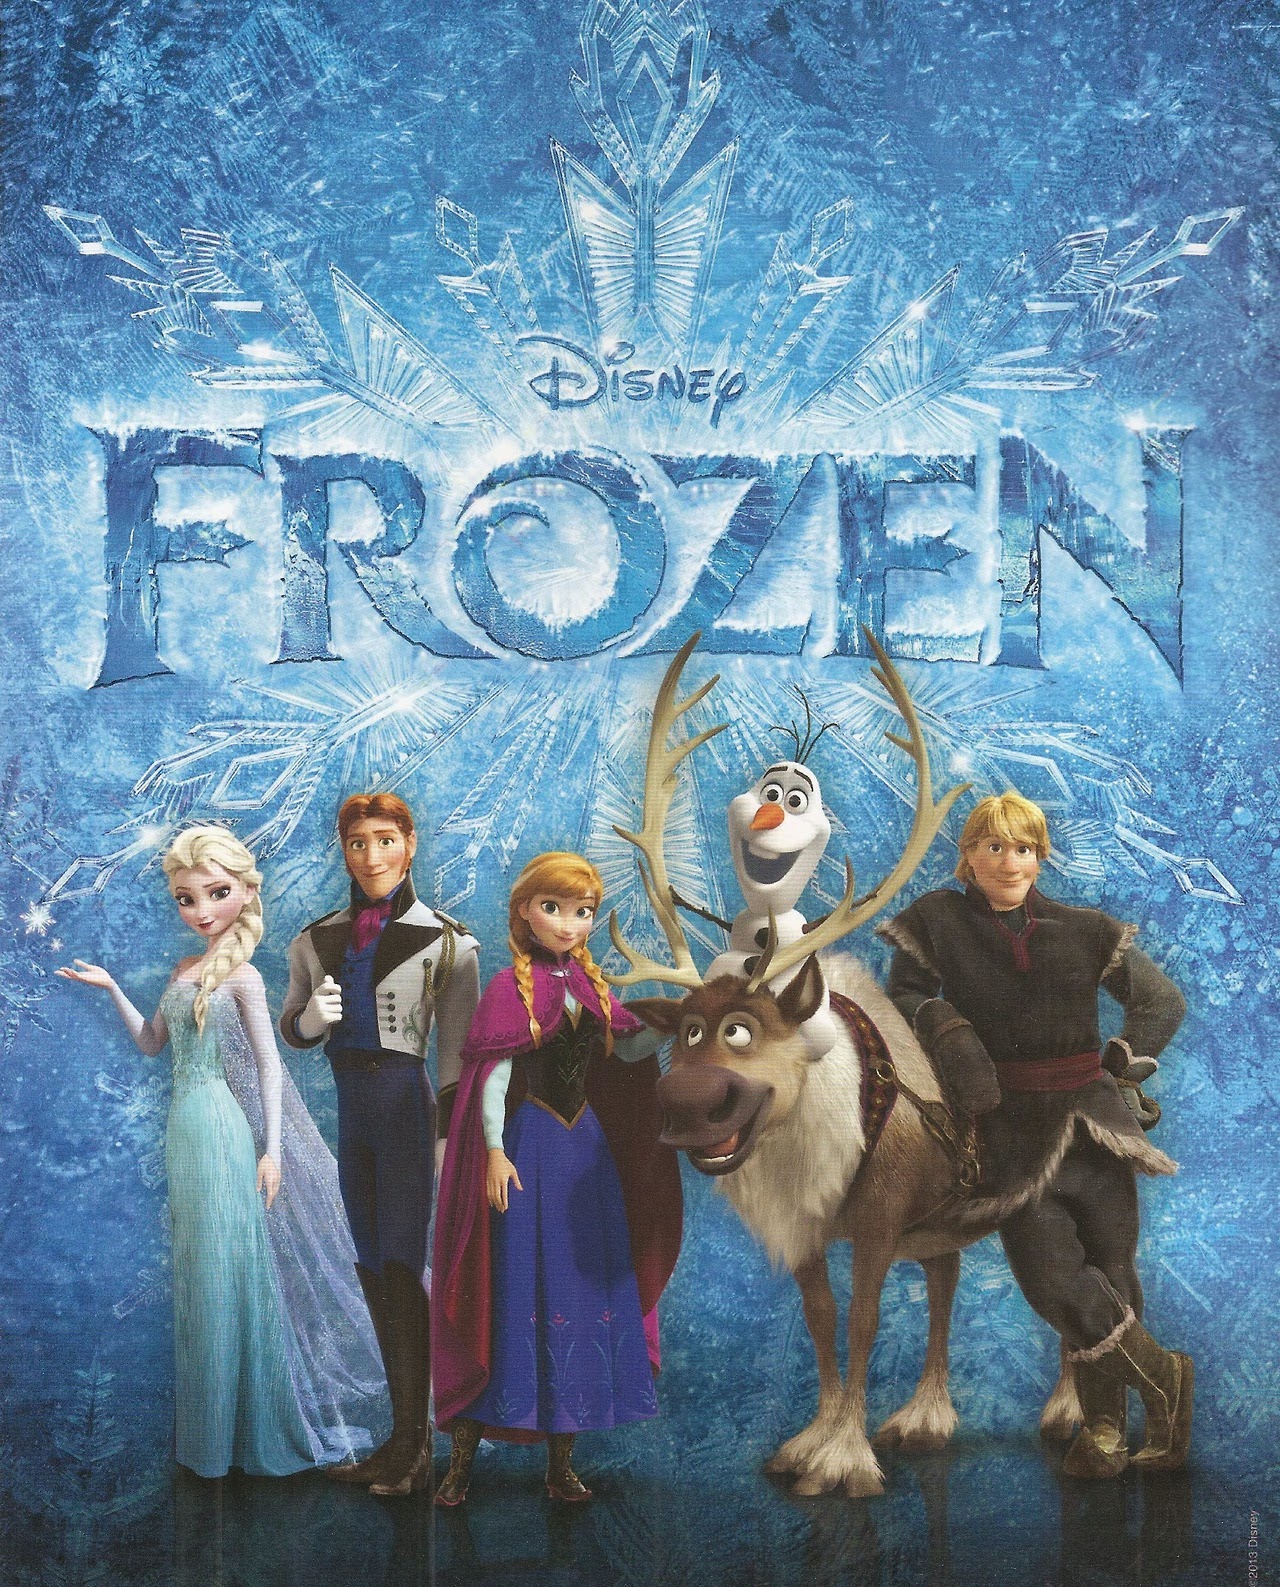 Adoption At The Movies Frozen Movie Review Adoption Movie Guide